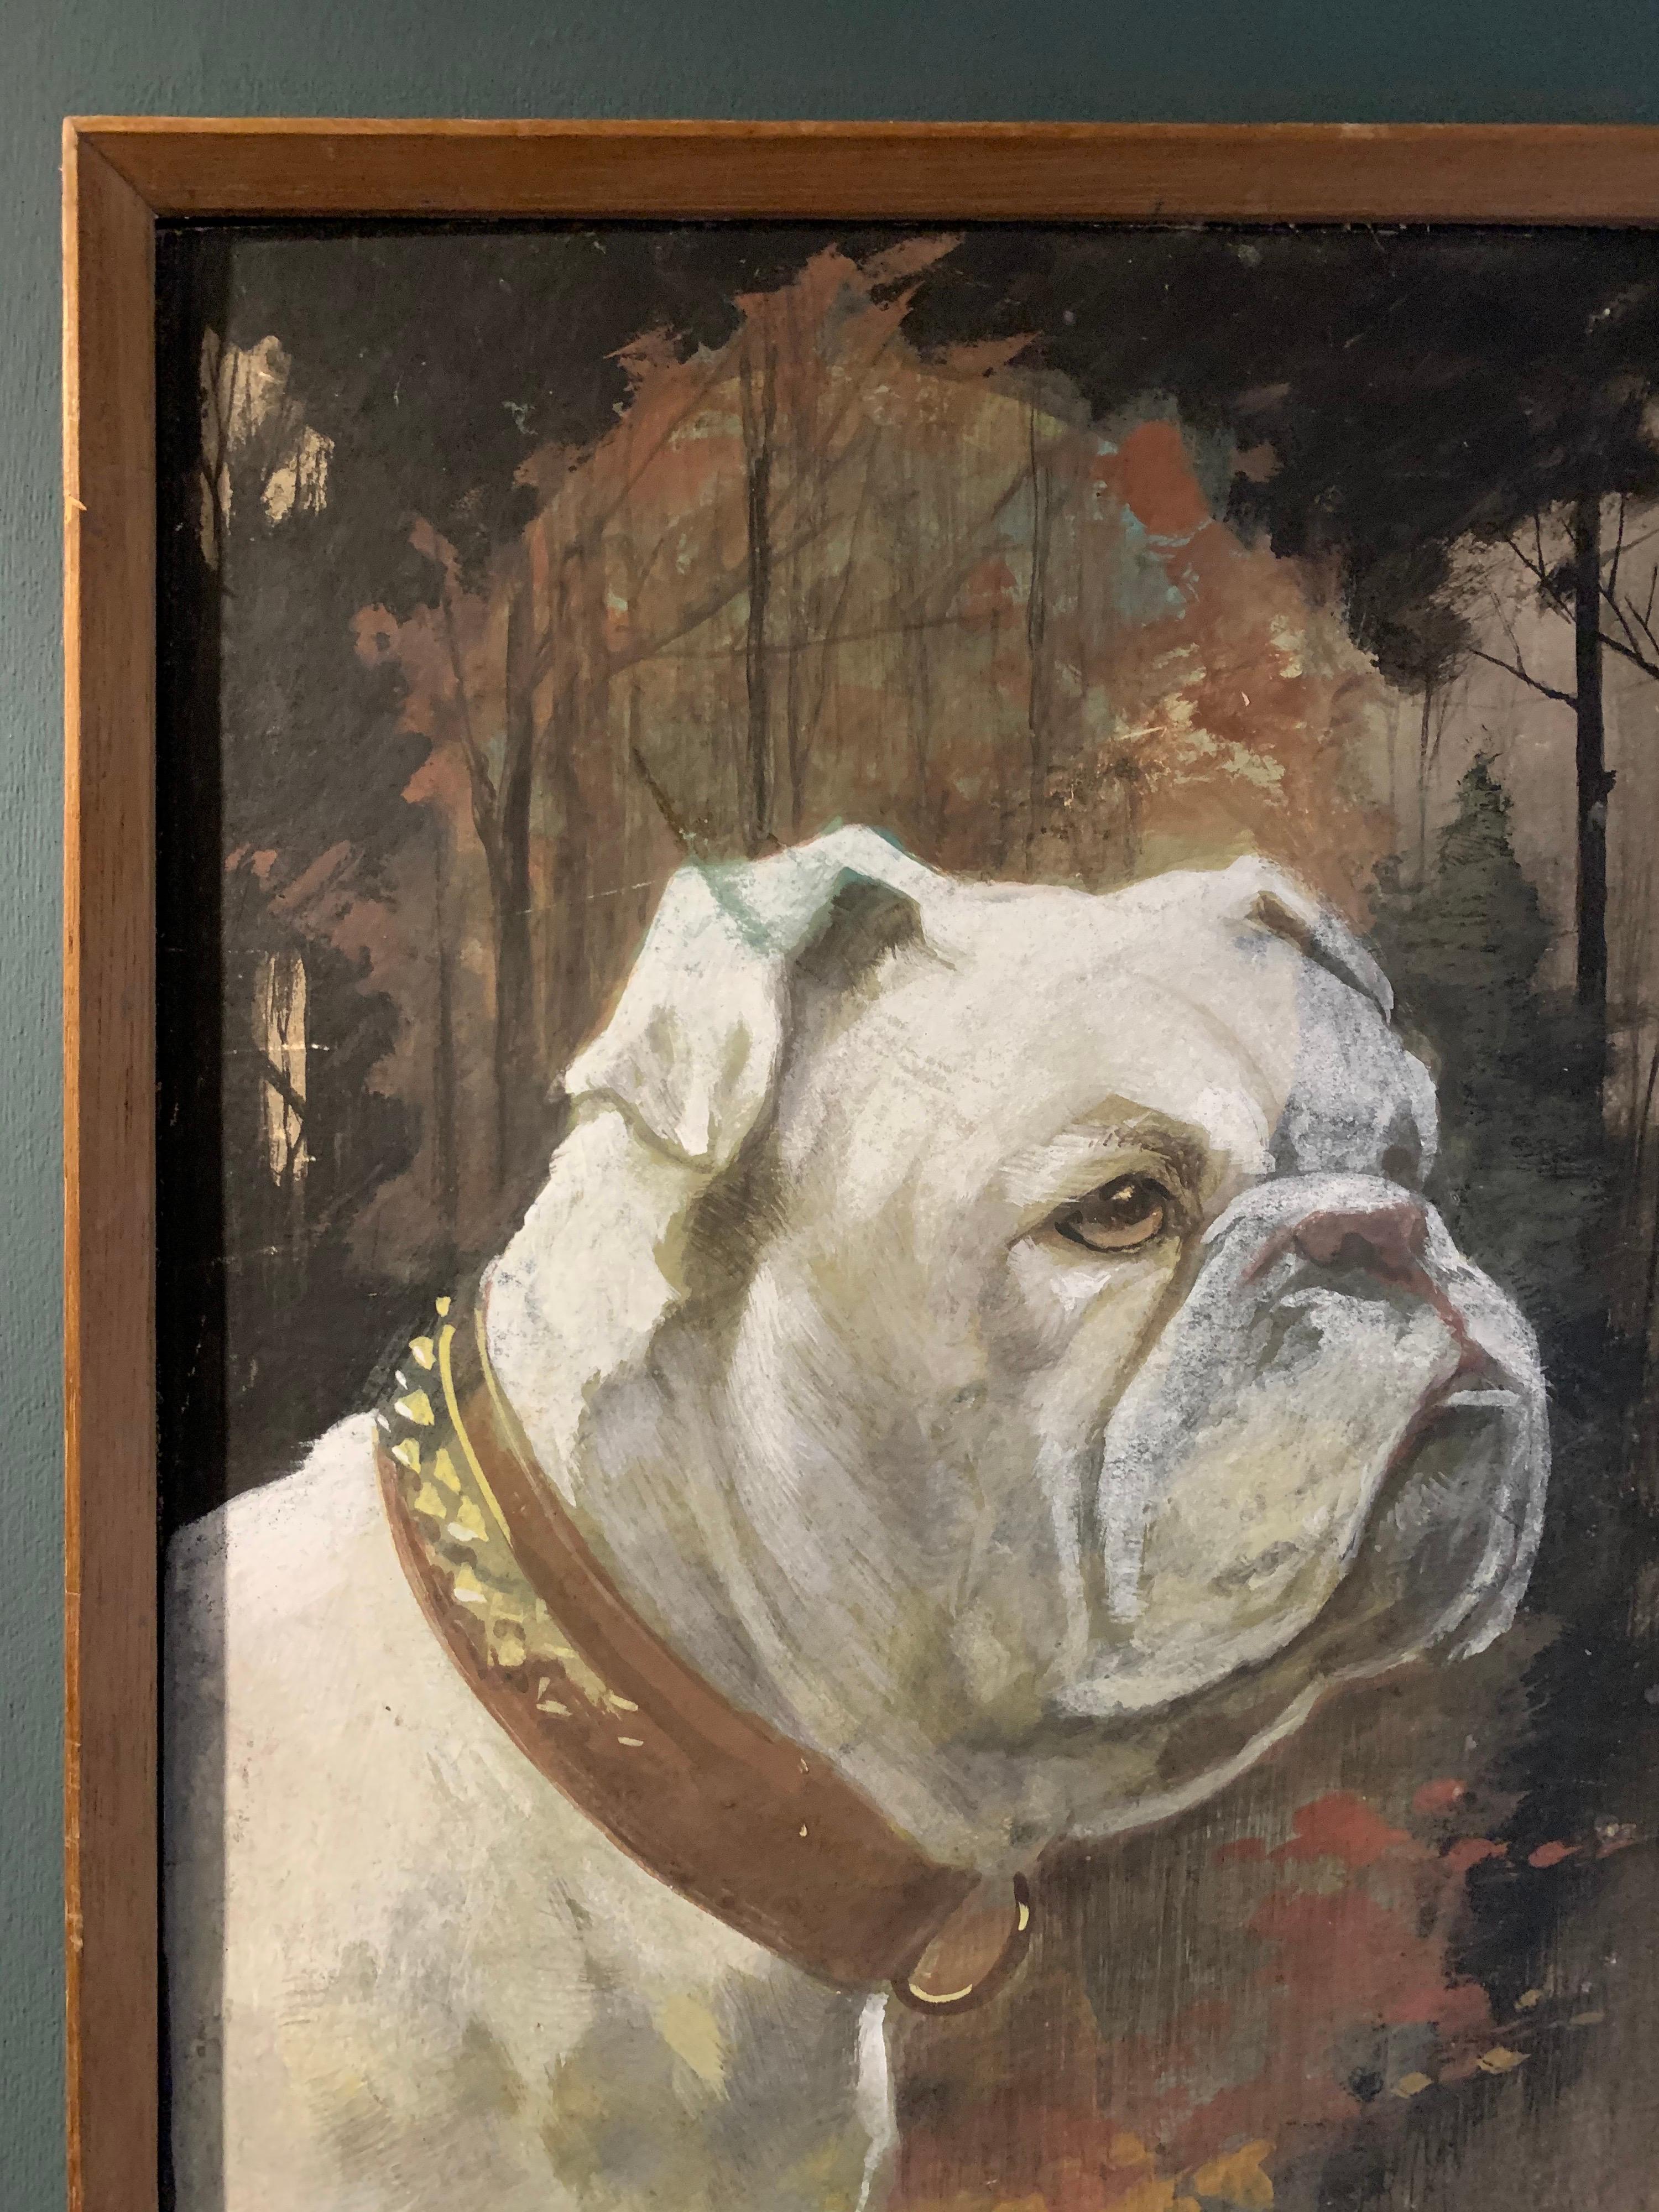 The British Bulldog
by Mercy Creed, British early 20th century
signed, gouache painting on card, framed
framed size: 14.5 x 10.5 inches

Superb original painting of this wonderfully characterful British Bulldog, who is standing proudly in a woodland